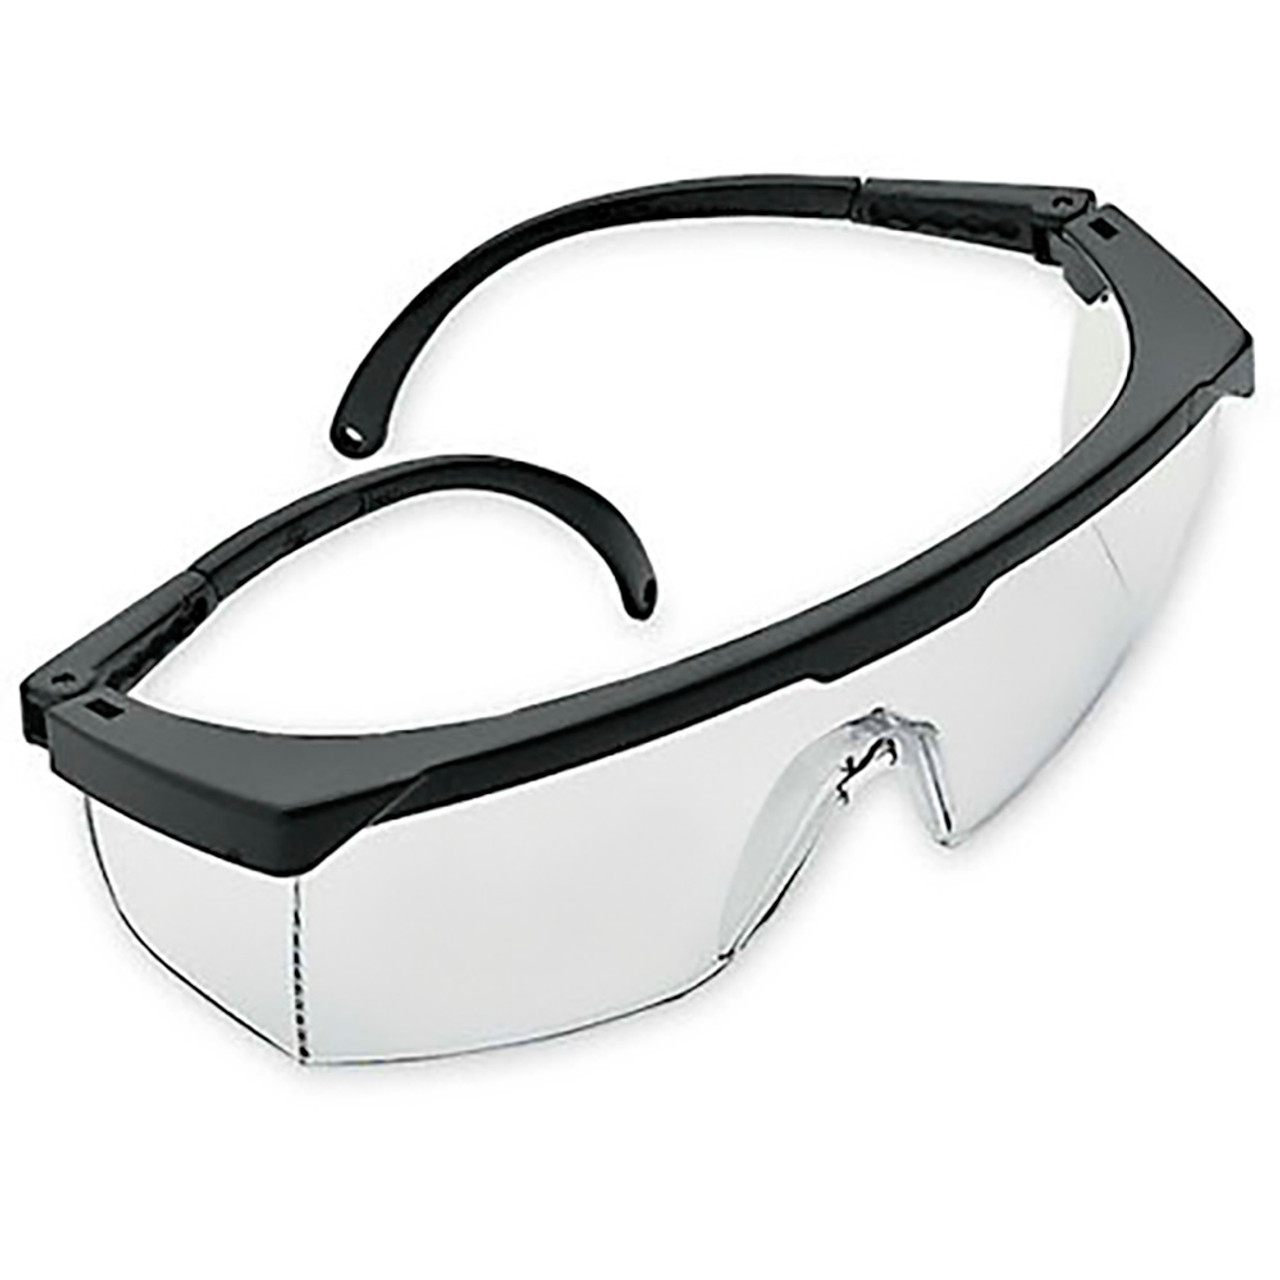 Sellstrom® Sebring Hard Coated Safety Glasses - Clear - Black Frames w/Extendable Arms  S76301